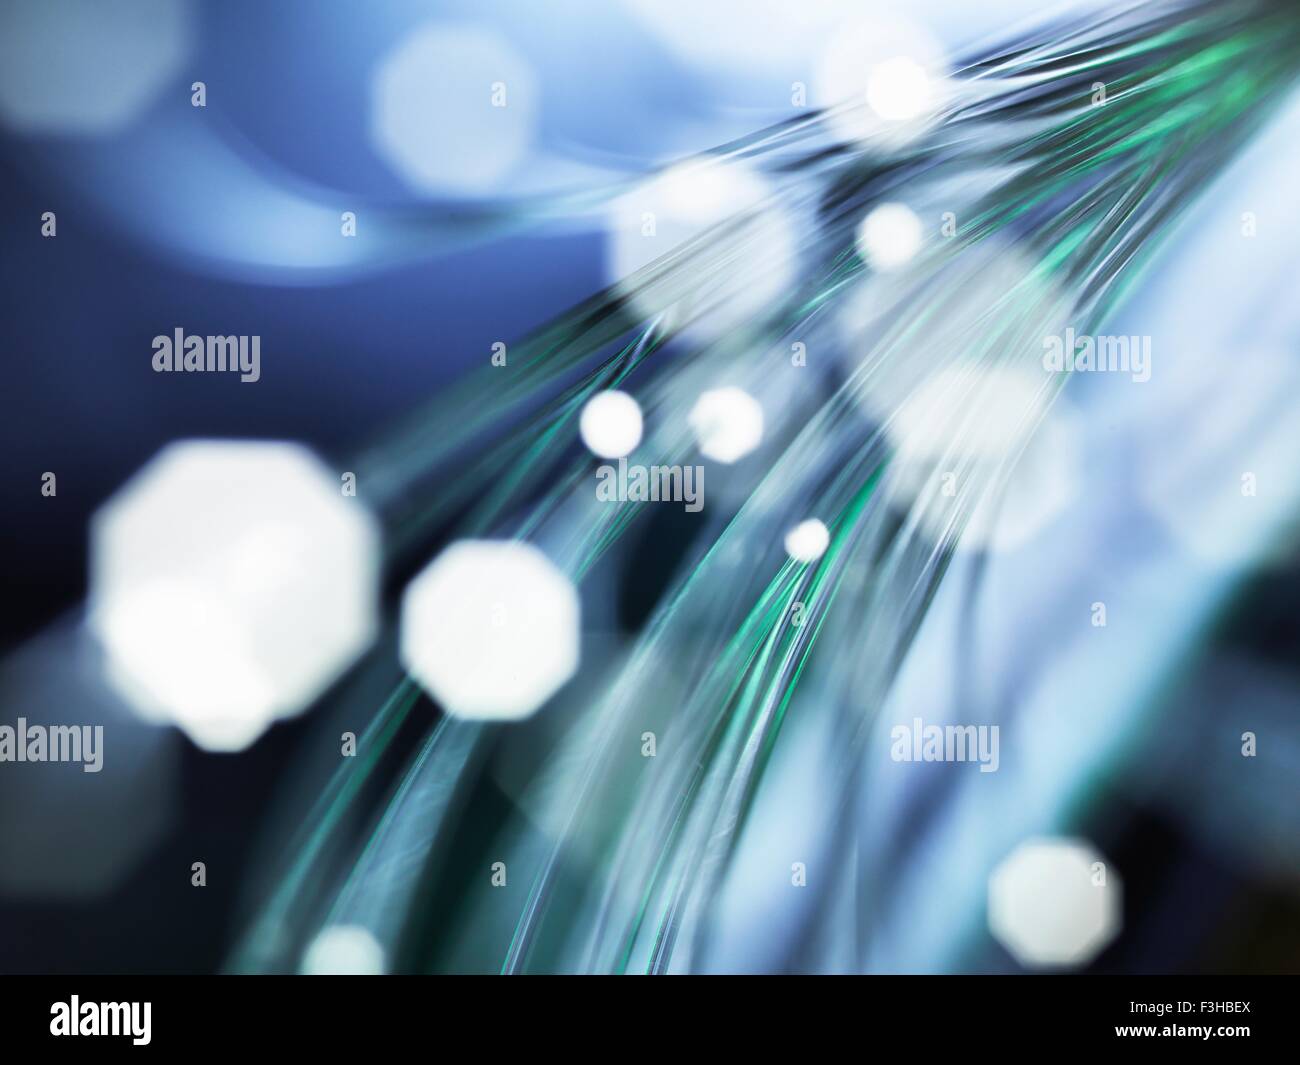 Strands of fibre optic used to send data, close-up Stock Photo